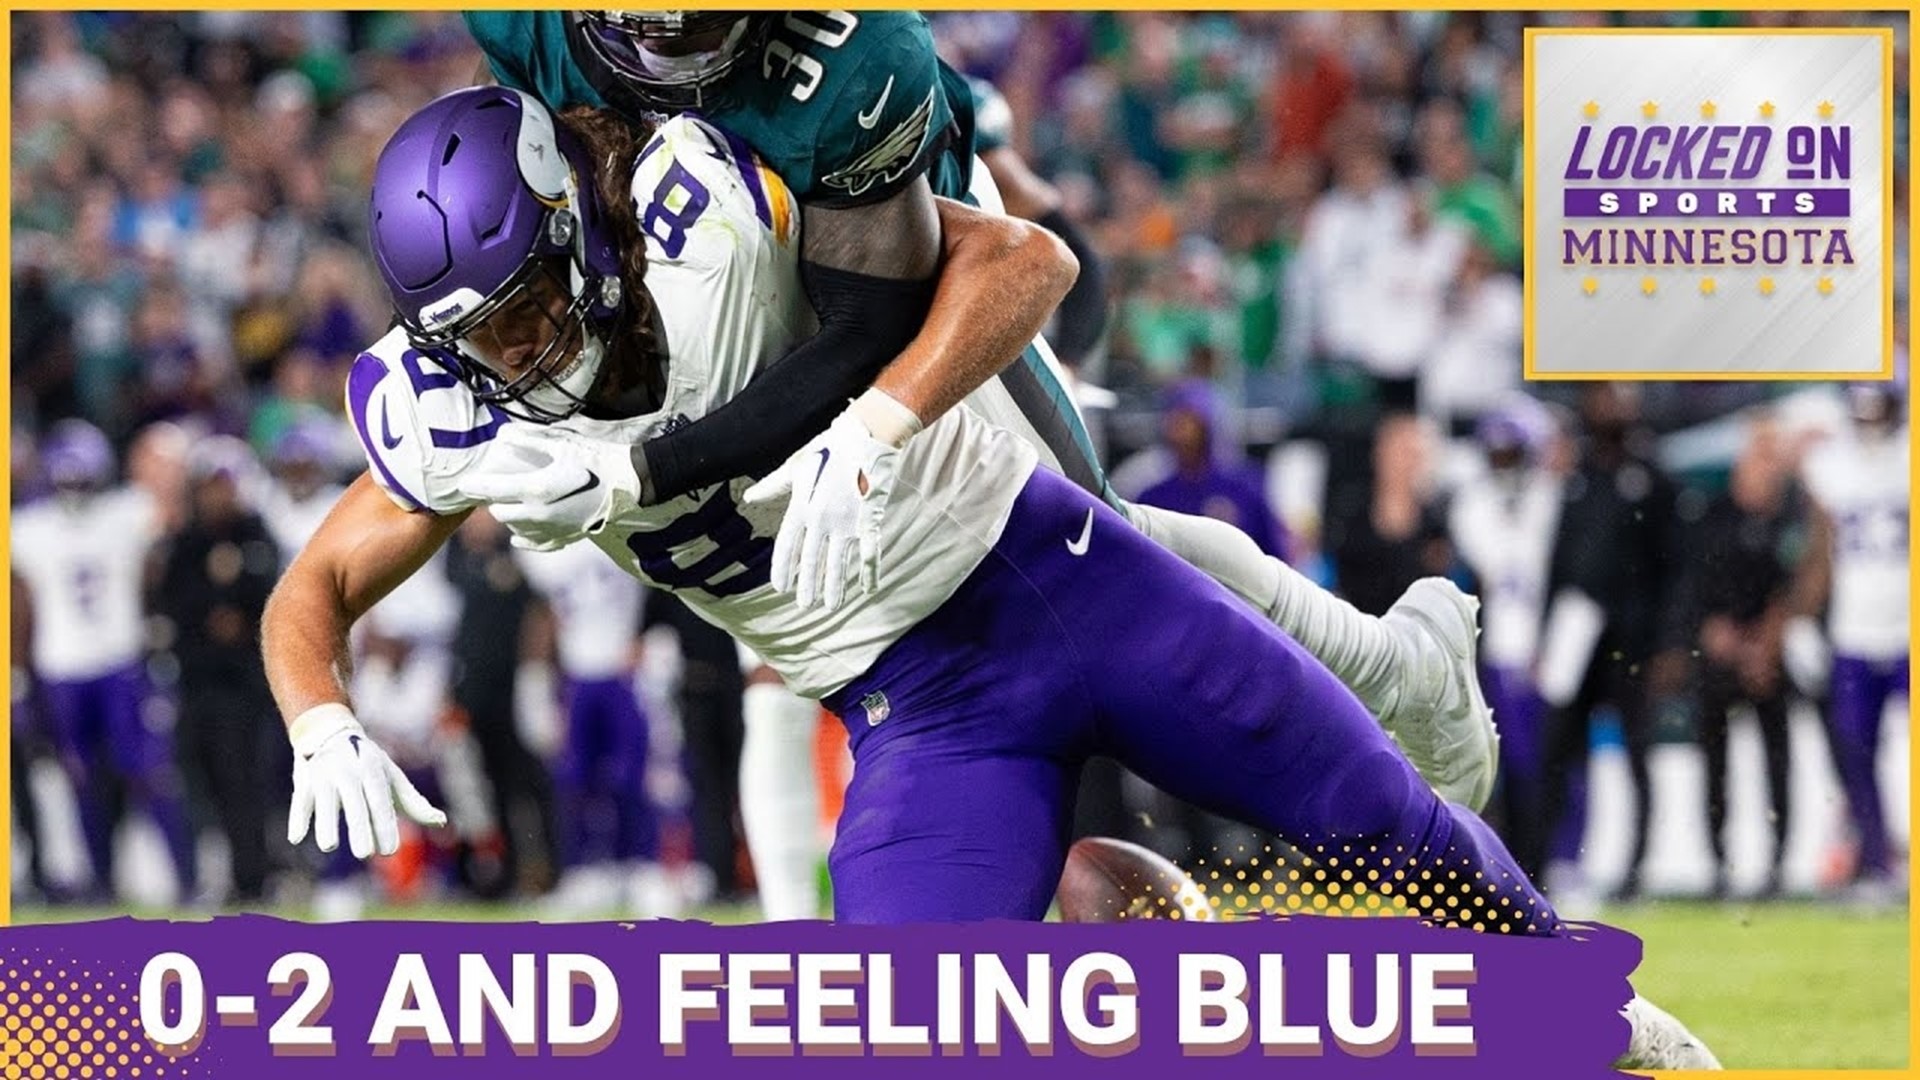 The Minnesota Vikings are 0-2, so Ron Johnson, Julia Daniels and Sam Ekstrom do their best to sort through the issues after Thursday night's loss to the Eagles.